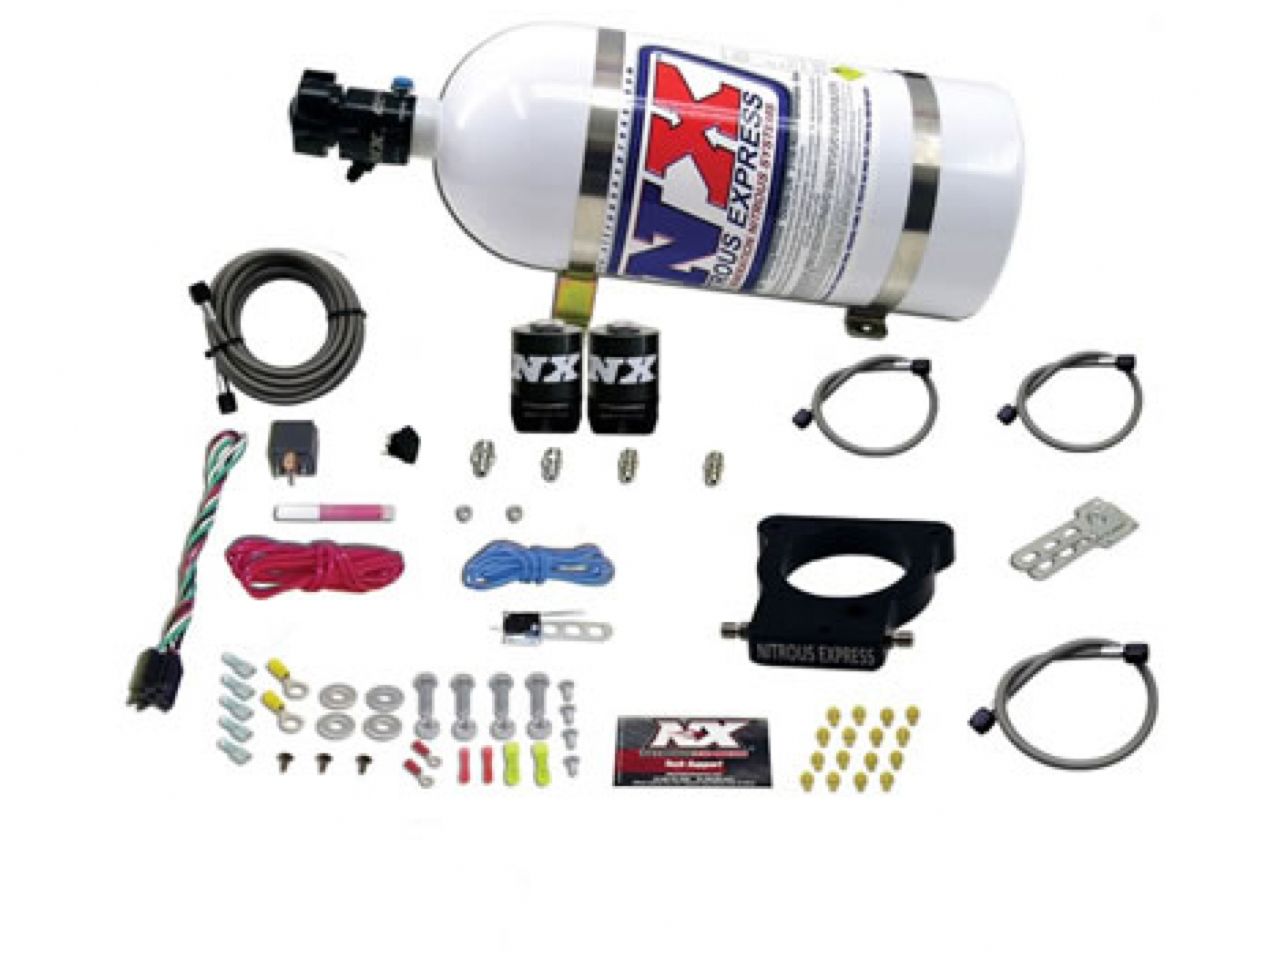 Nitrous Express Nitrous Oxide Kits and Accessories 20935-10 Item Image